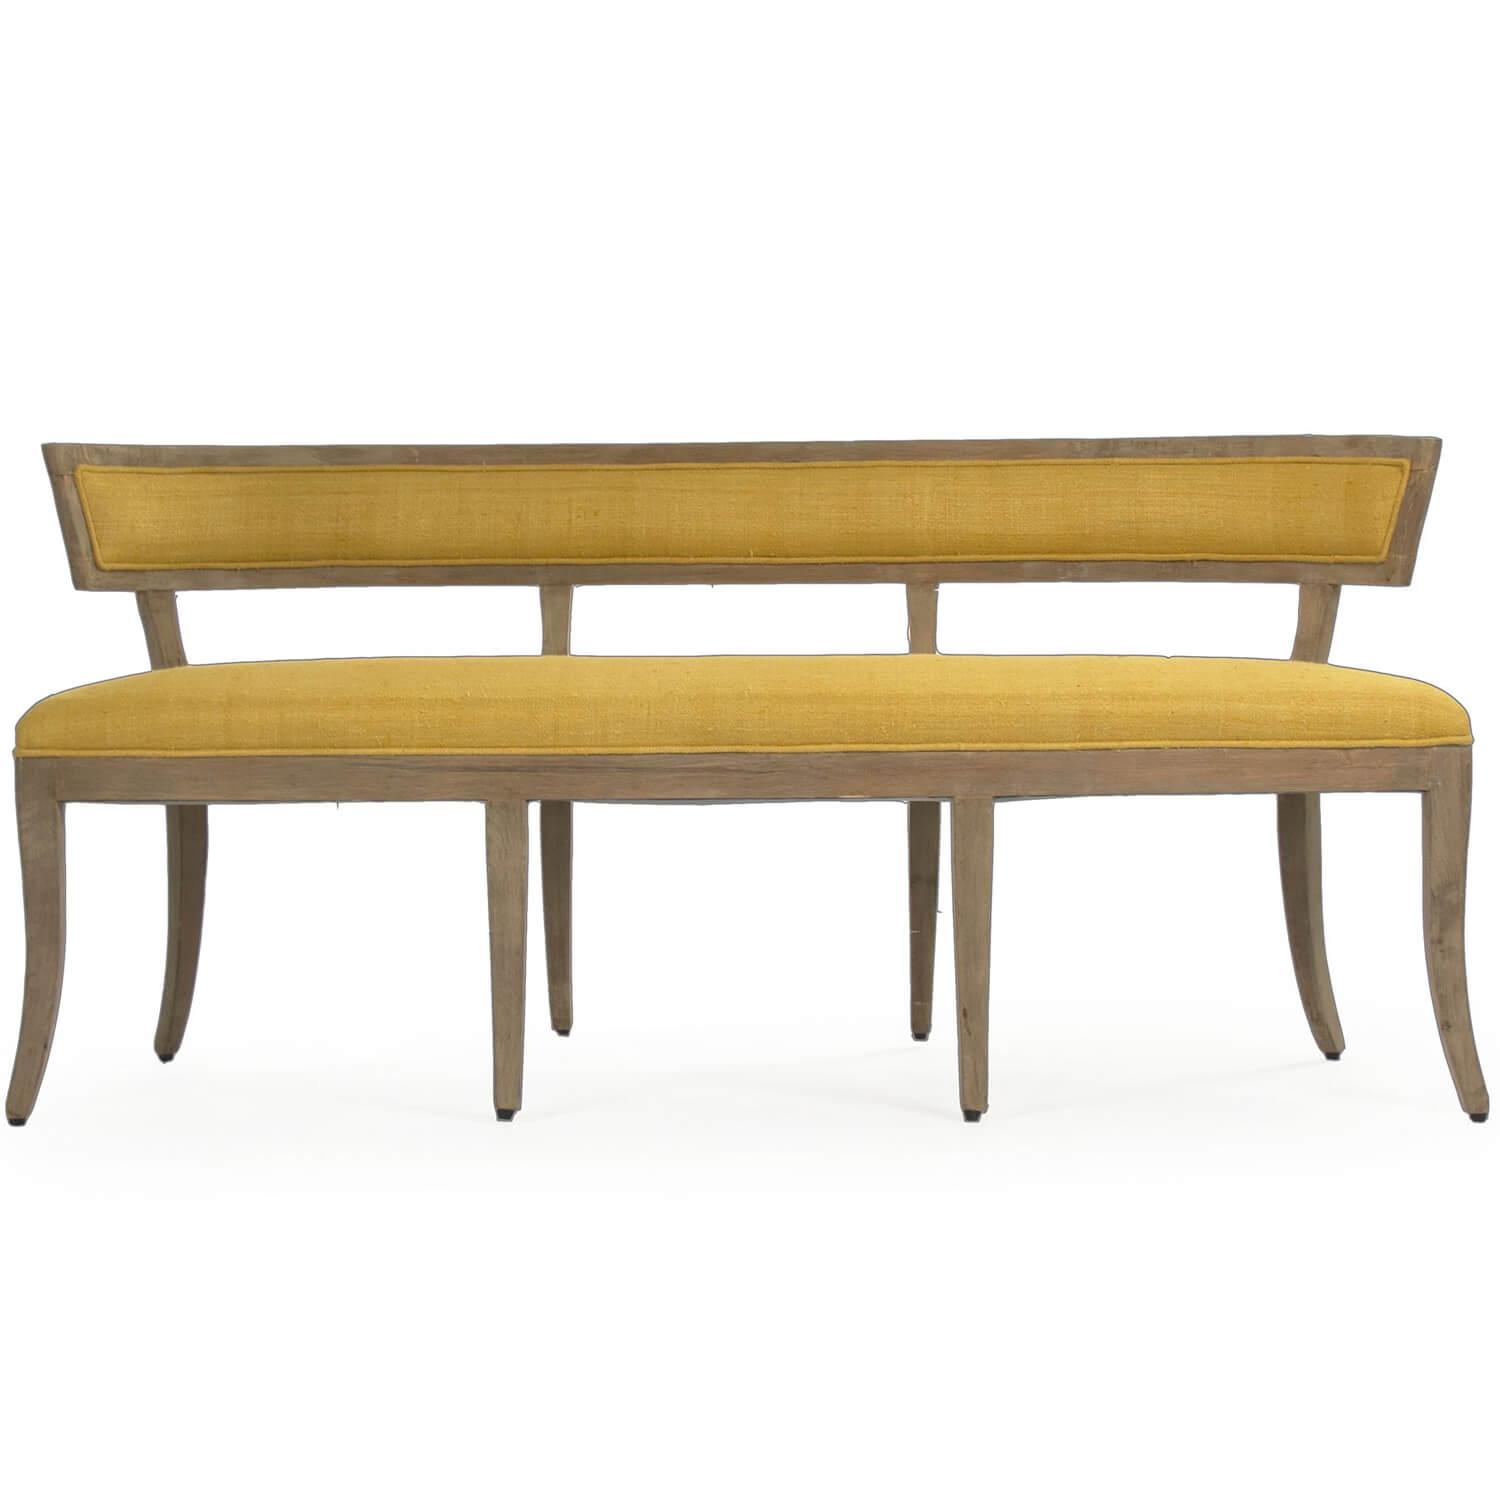 Sunflower Curved Bench - Belle Escape